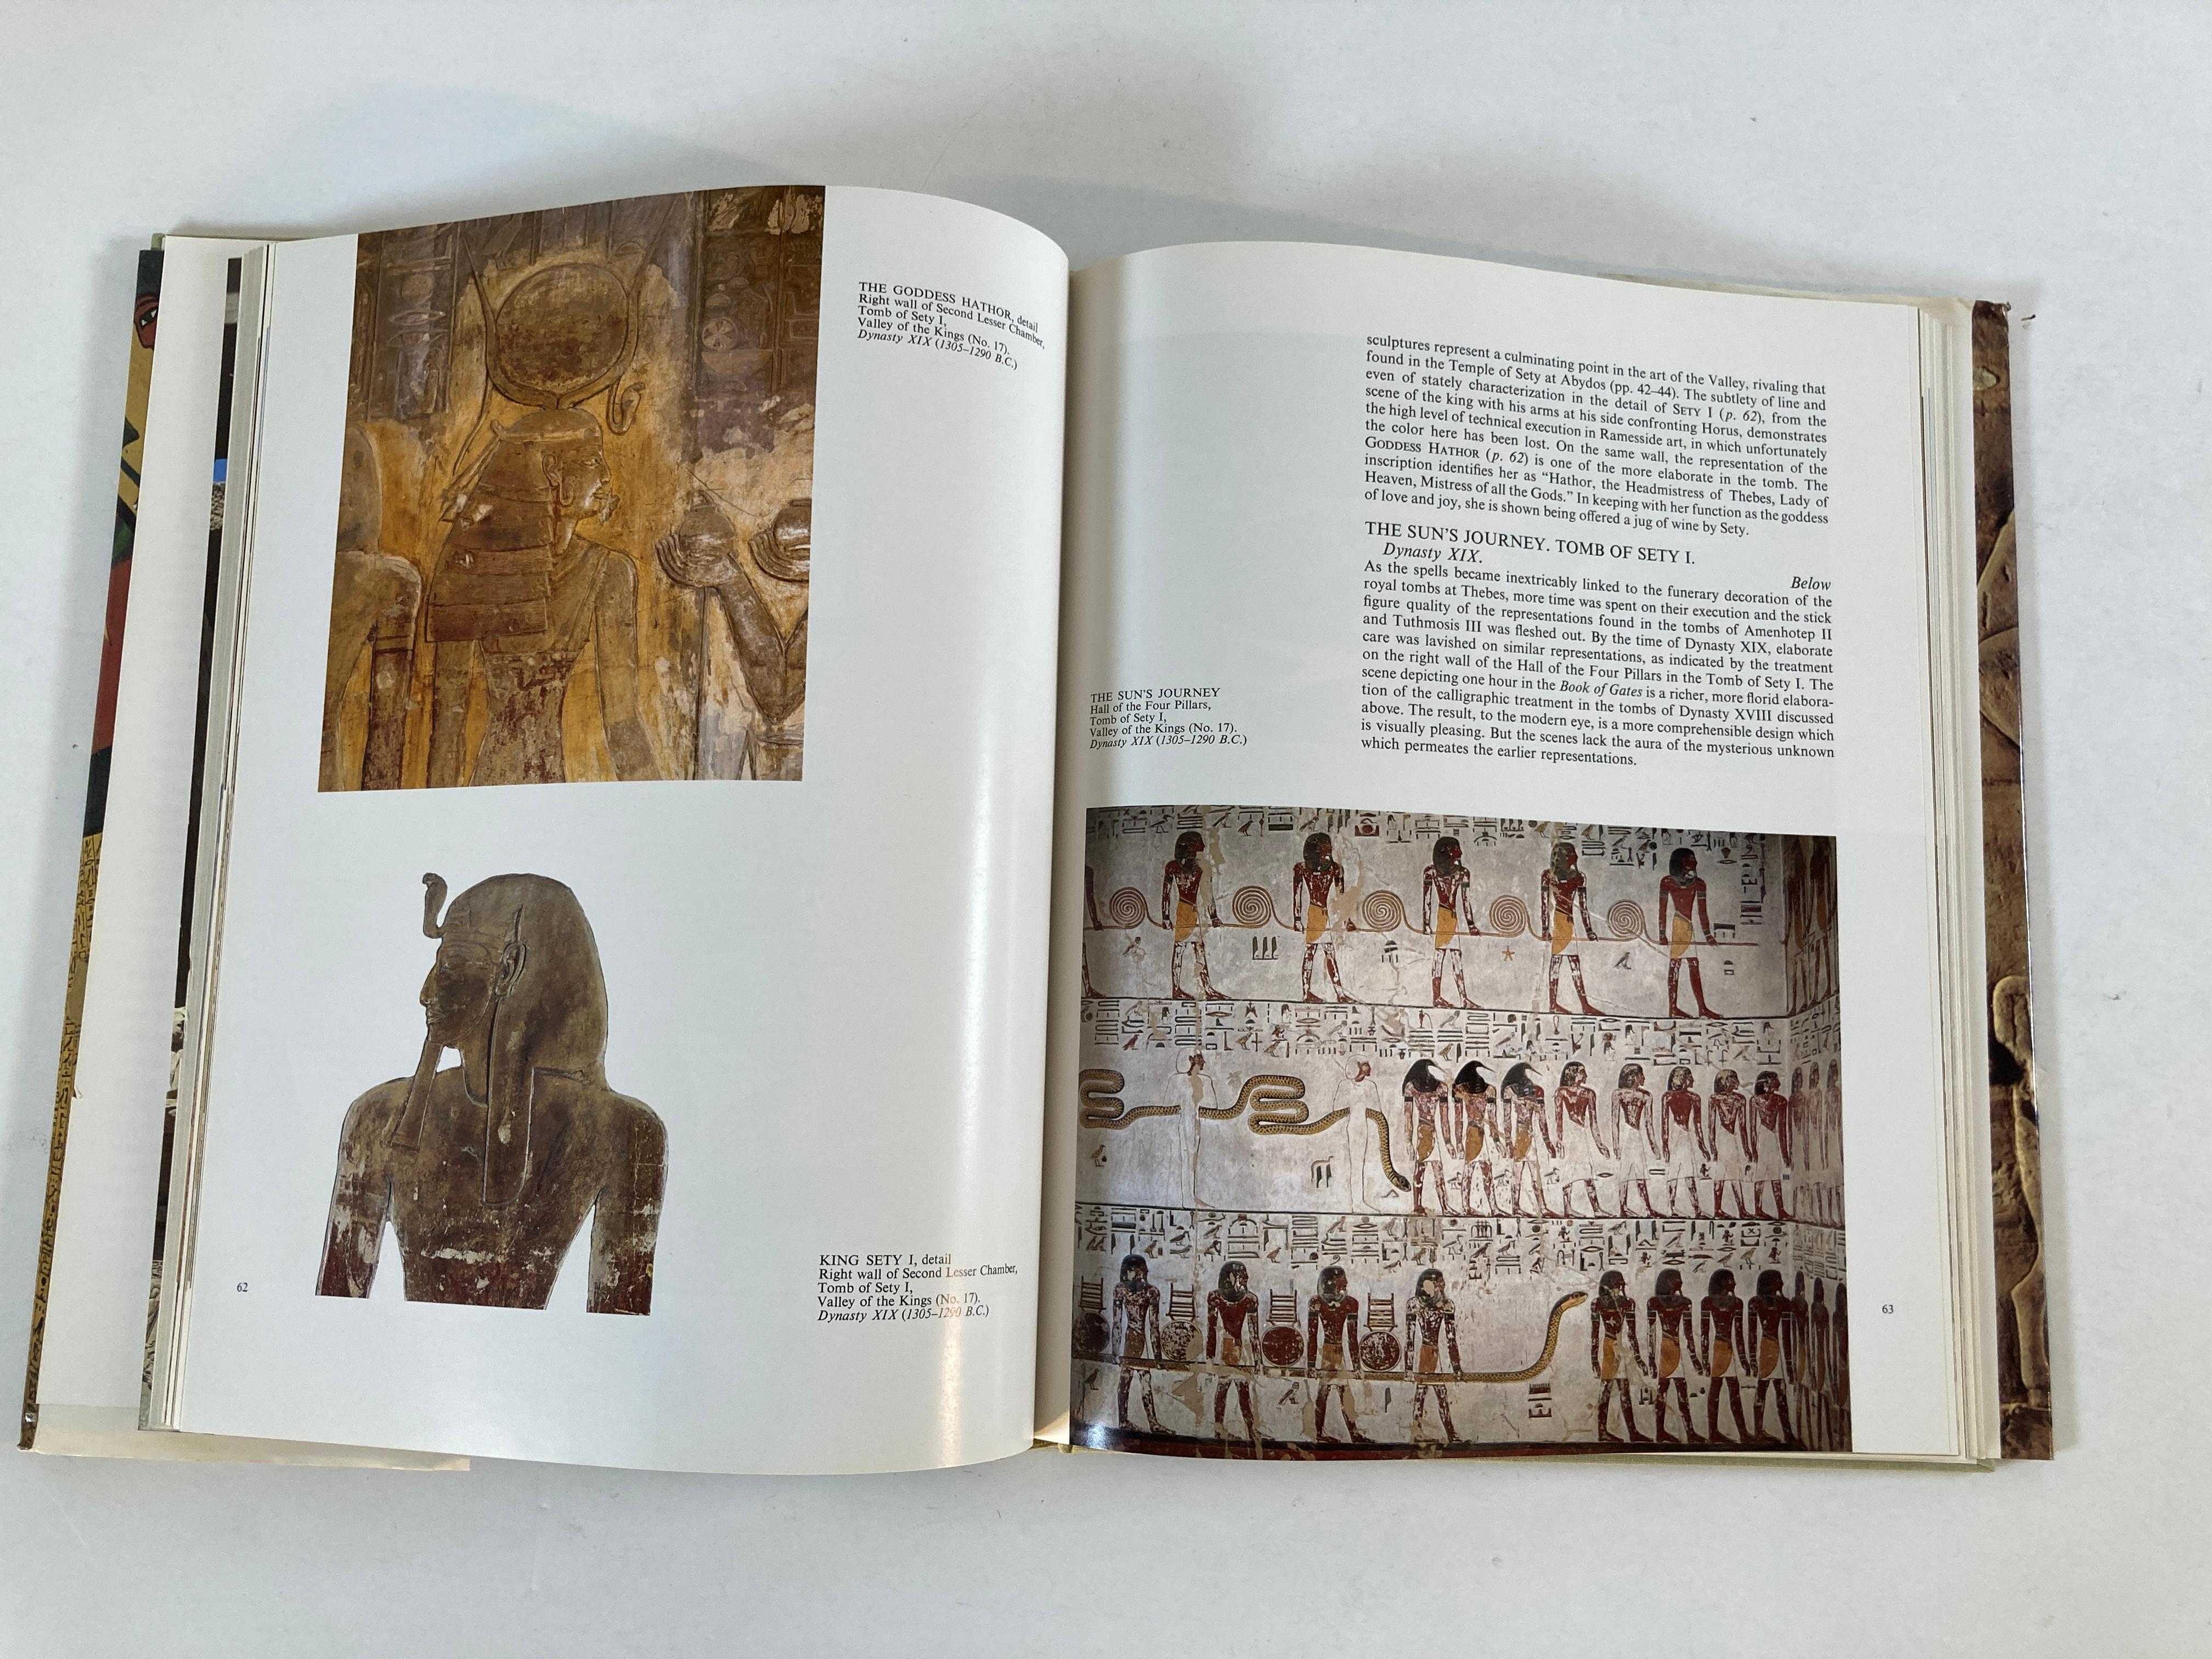 Treasures of the Nile: Art of the Temples and Tombs of Egypt Hardcover Book 2